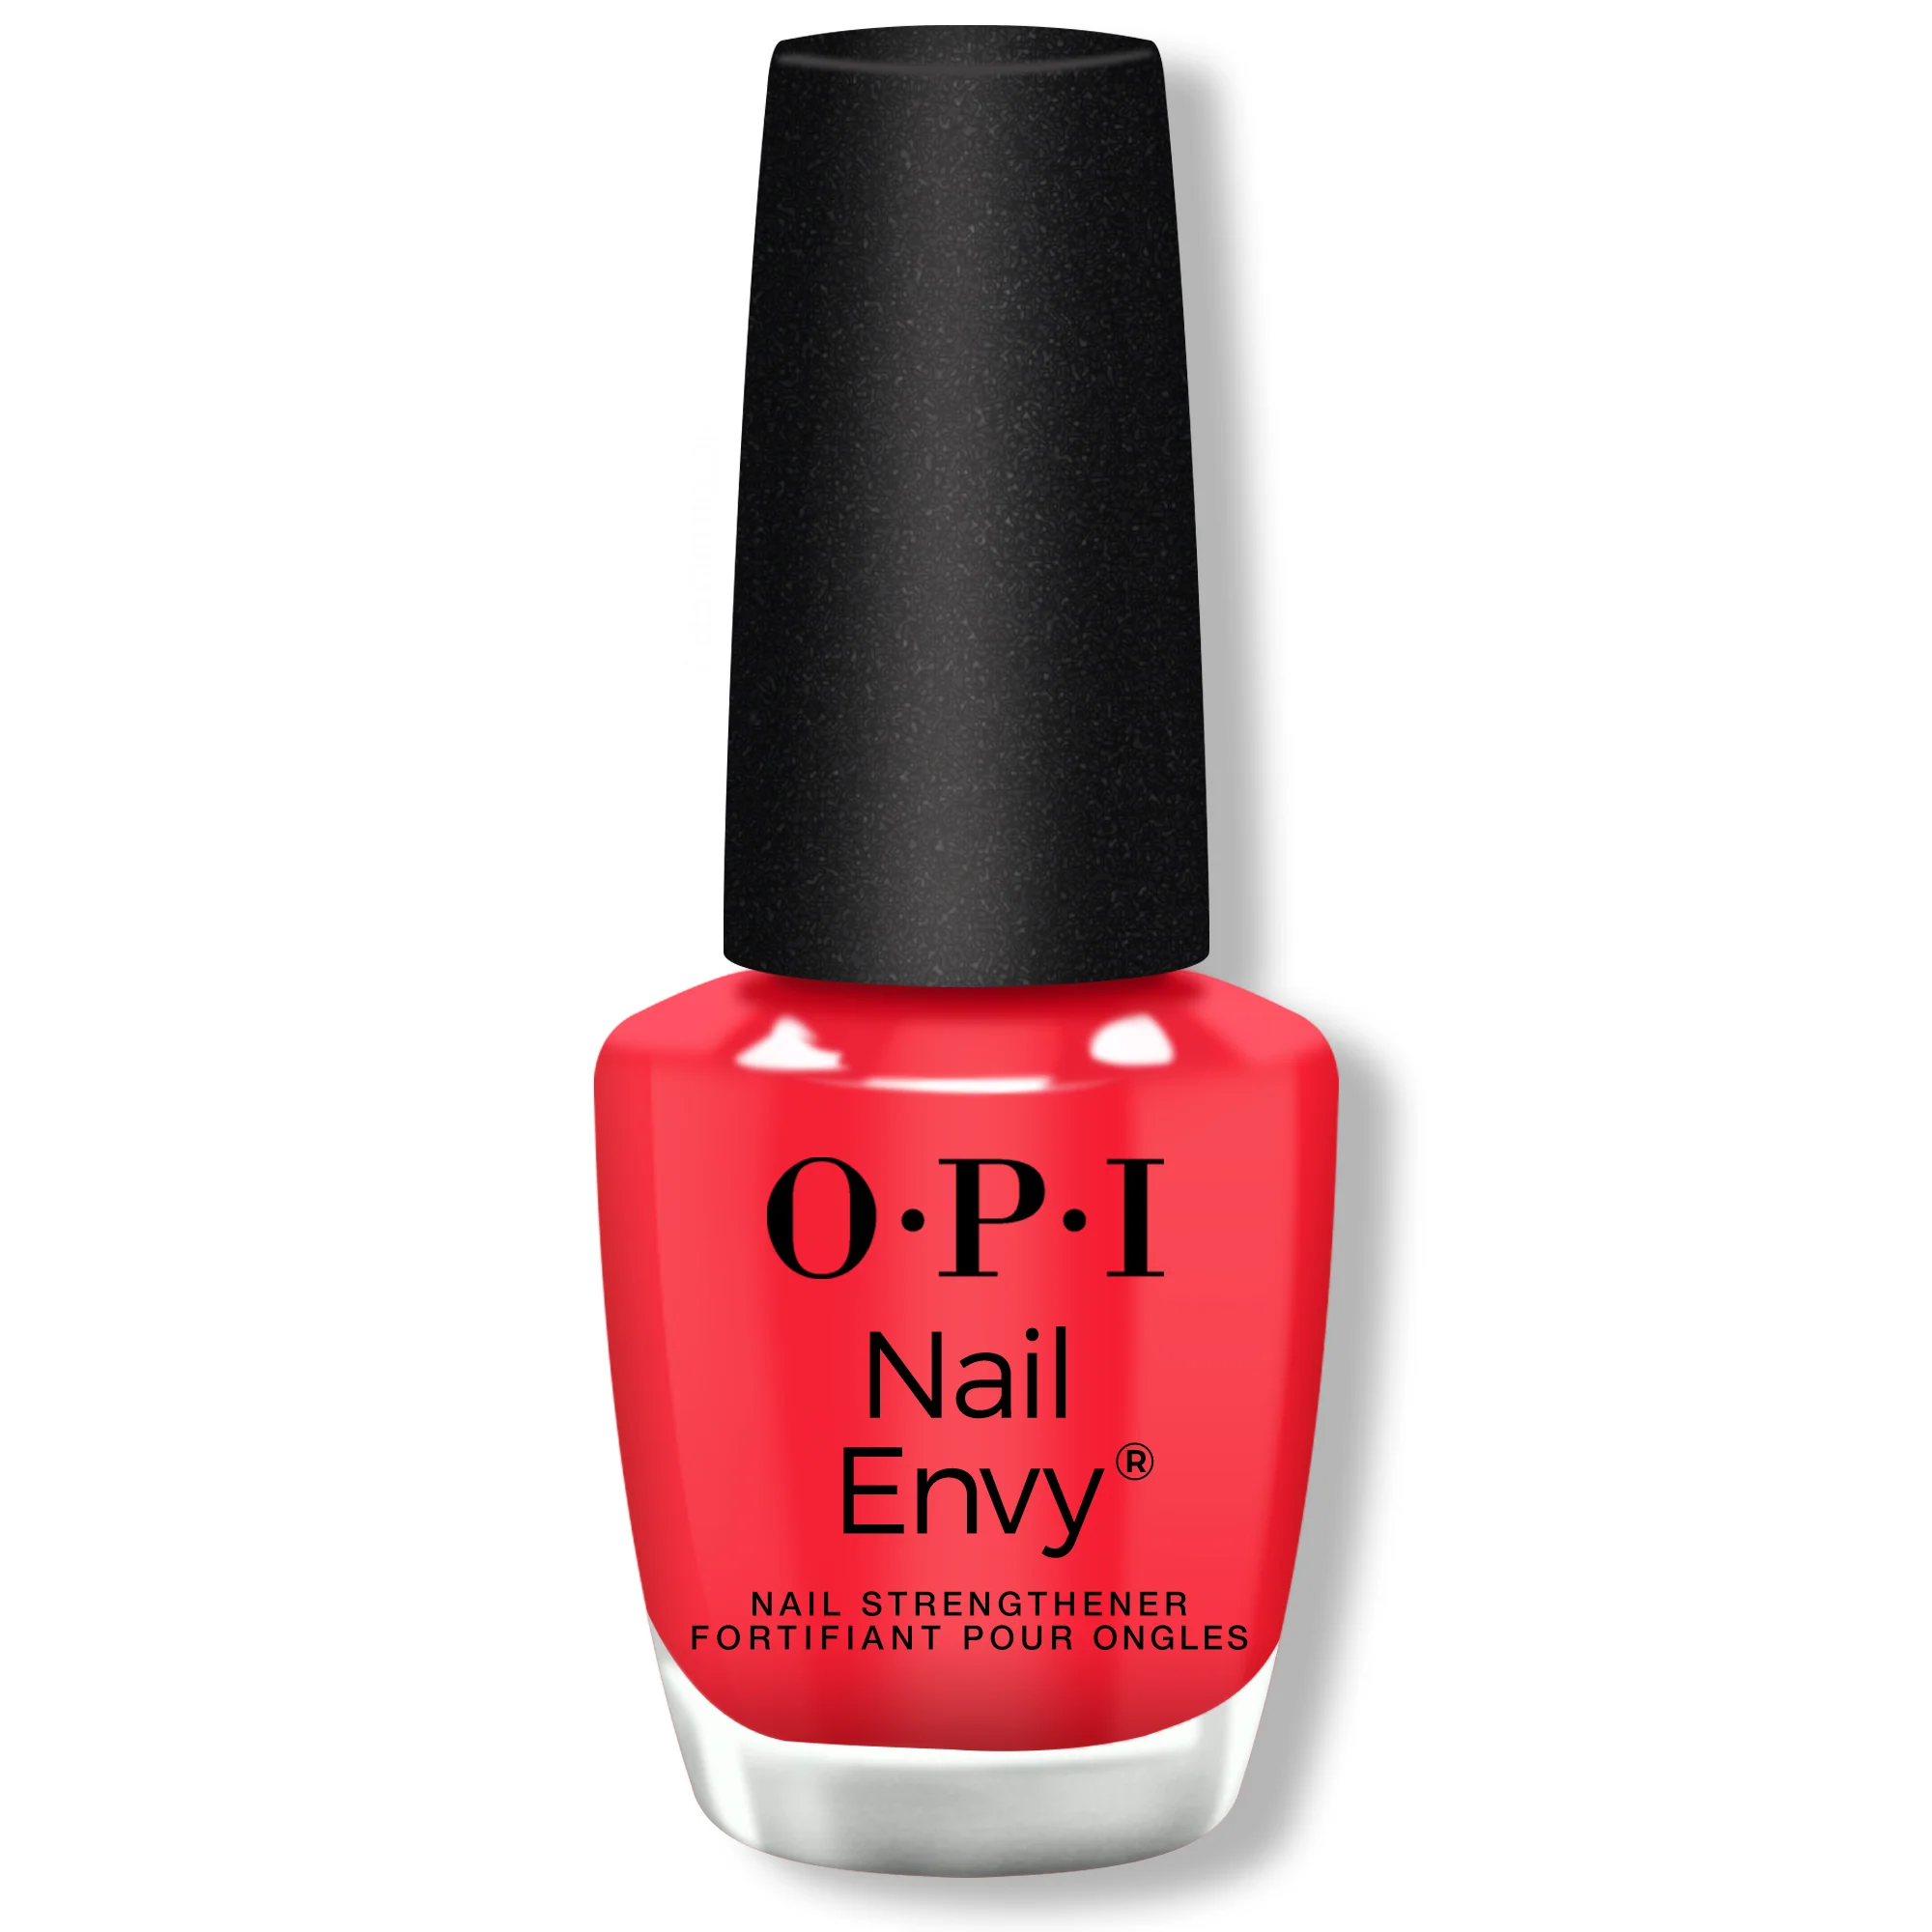 OPI Nail Envy with Tri-Flex - #NT225 - Big Apple Red